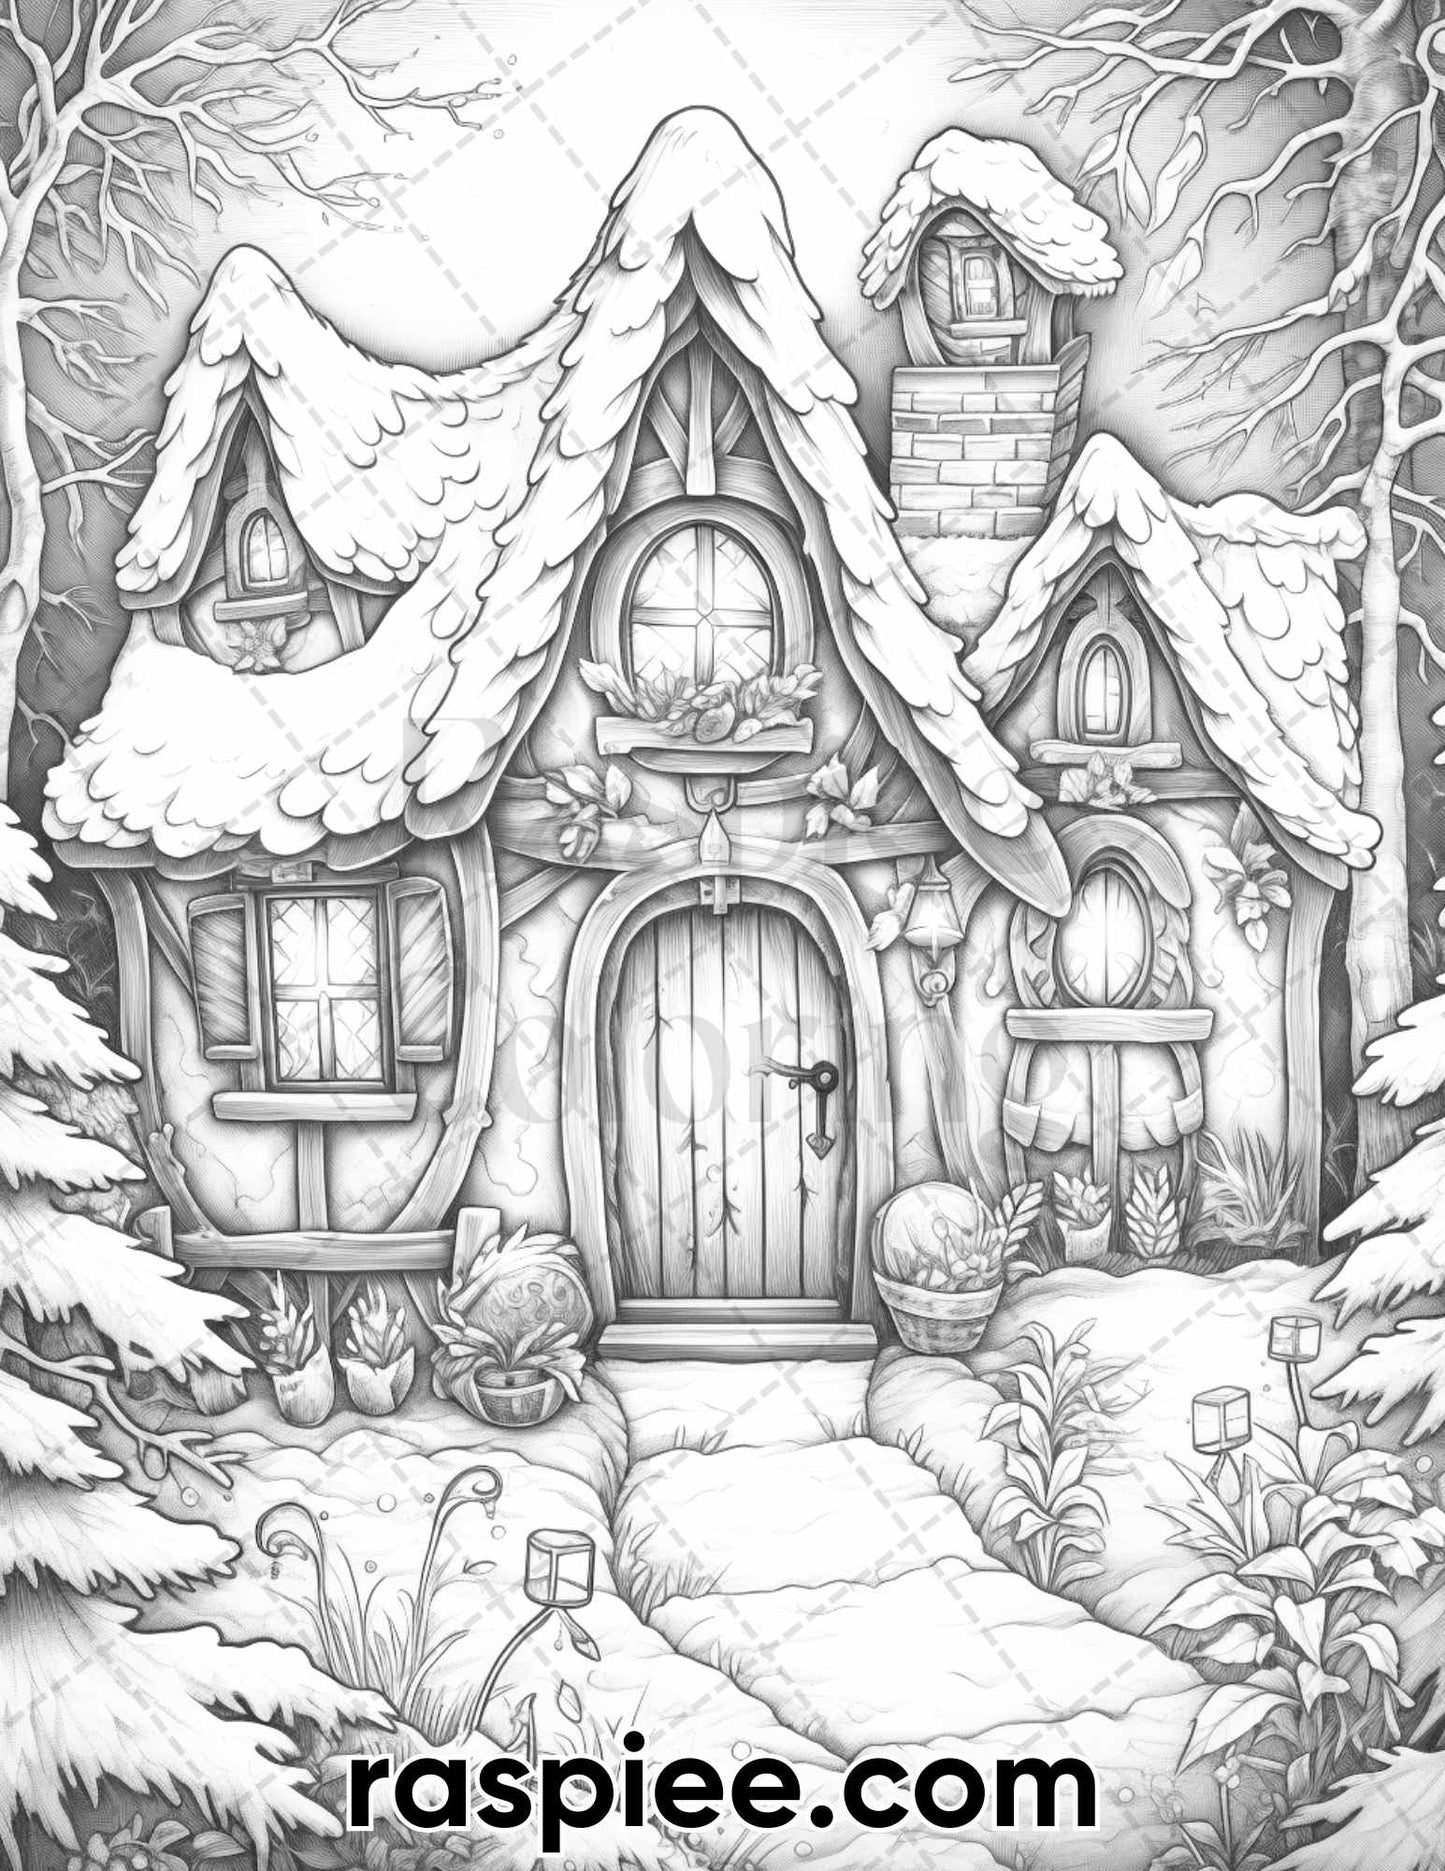 adult coloring pages, adult coloring sheets, adult coloring book pdf, adult coloring book printable, christmas coloring pages for adults, christmas coloring book pdf, xmas coloring pages, holiday coloring pages for adults, winter coloring pages for adults, christmas coloring sheets, fairy house coloring page